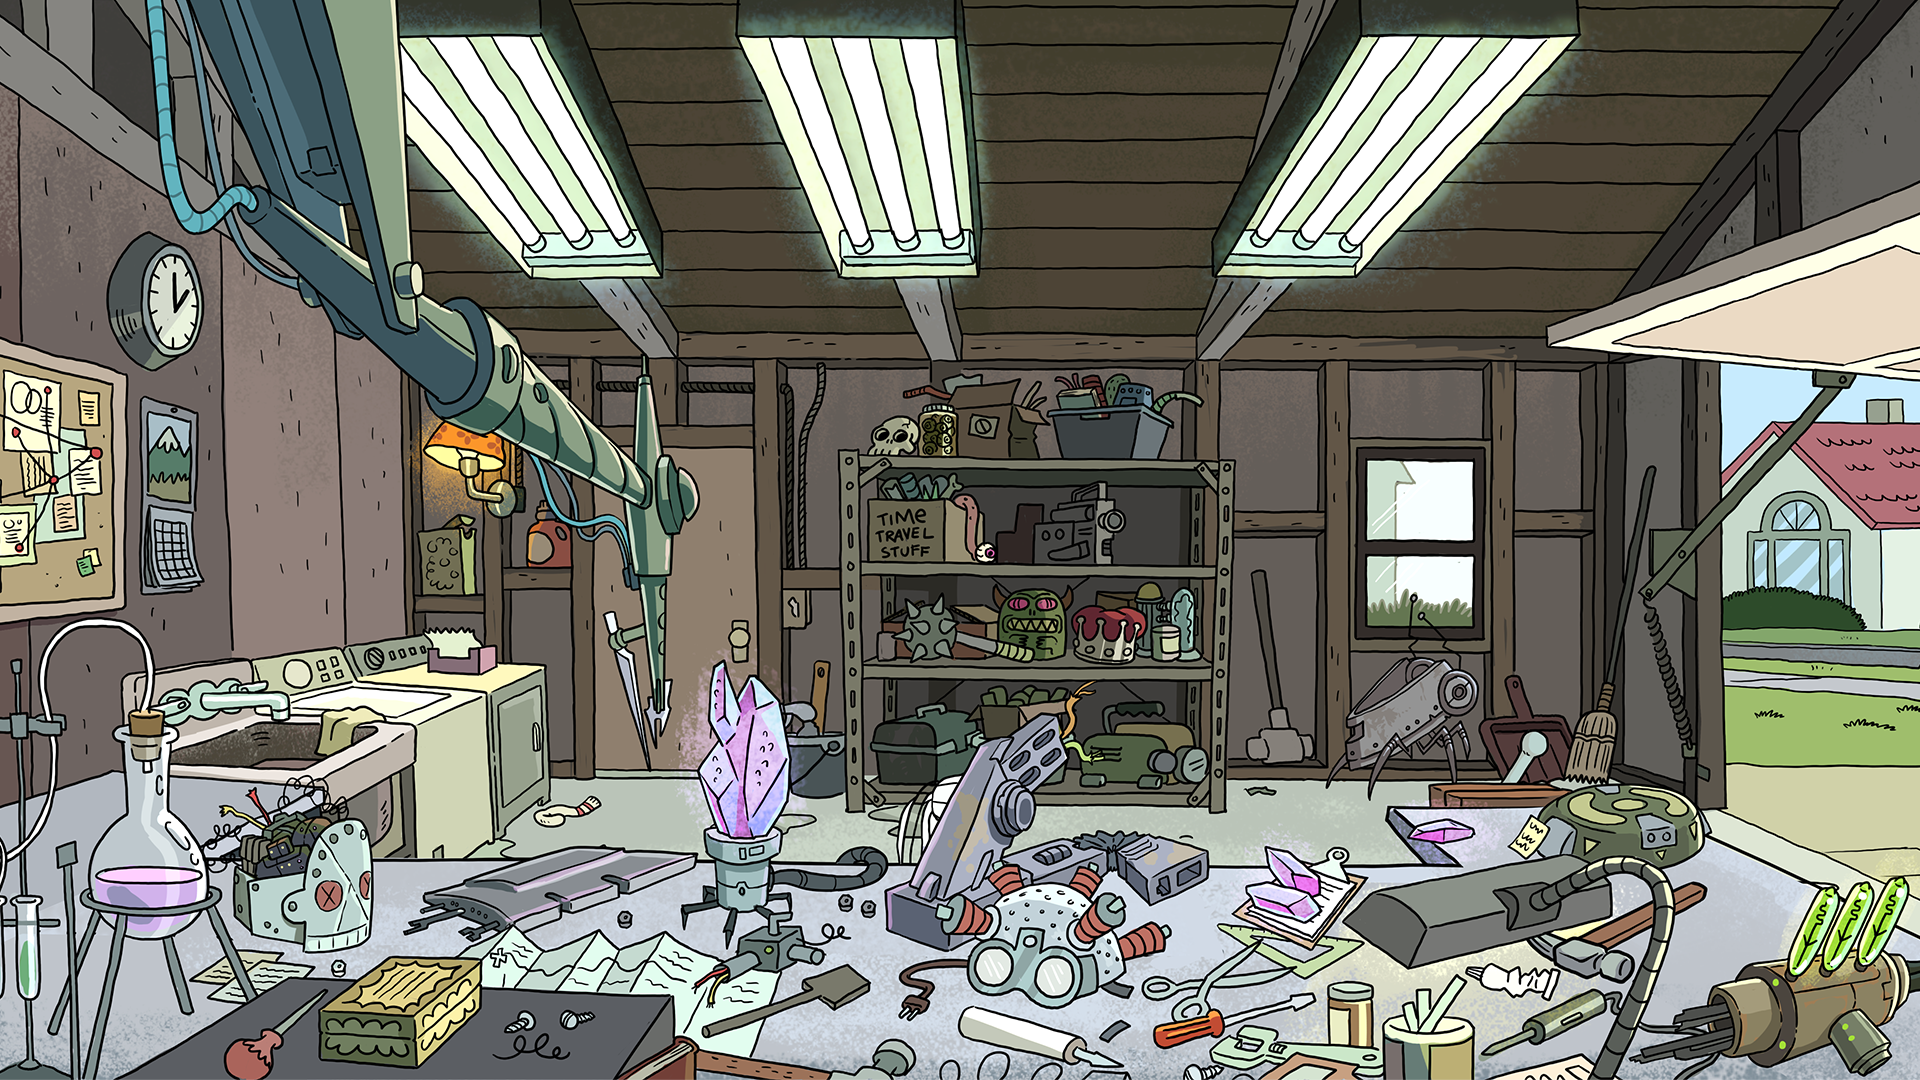 Rick and Morty Virtual Backgrounds Arrive for Zoom Video Conferencing.